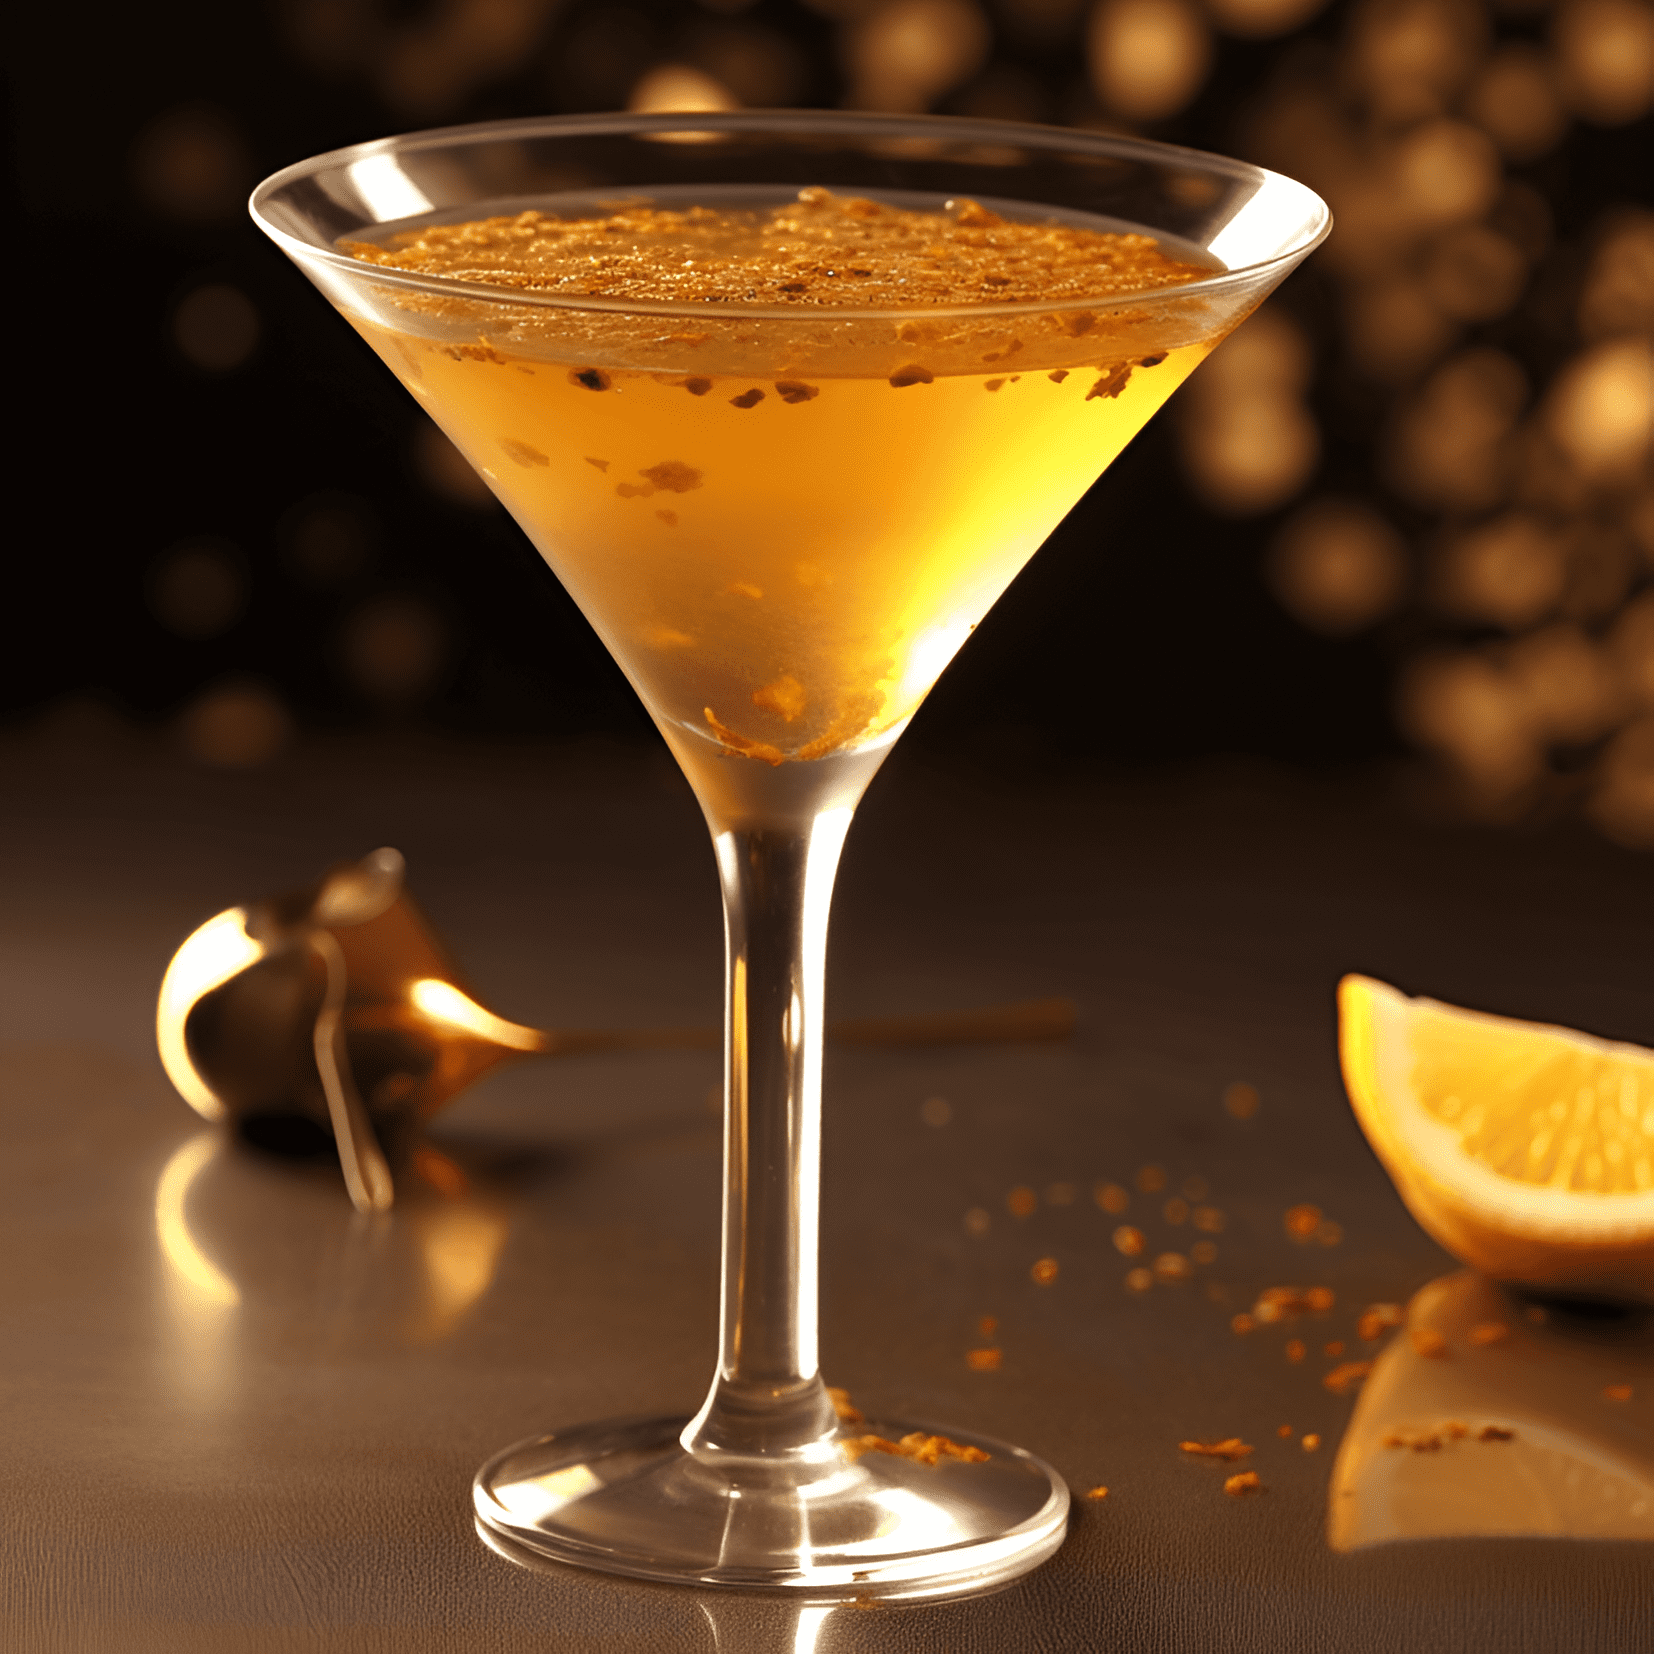 Golden Dream Cocktail Recipe - The Golden Dream has a rich, creamy texture with a sweet and tangy citrus flavor. It is a well-balanced drink, with the sweetness of the Galliano and the tartness of the orange juice complementing each other perfectly. The drink is smooth and velvety, making it a delightful treat for the taste buds.